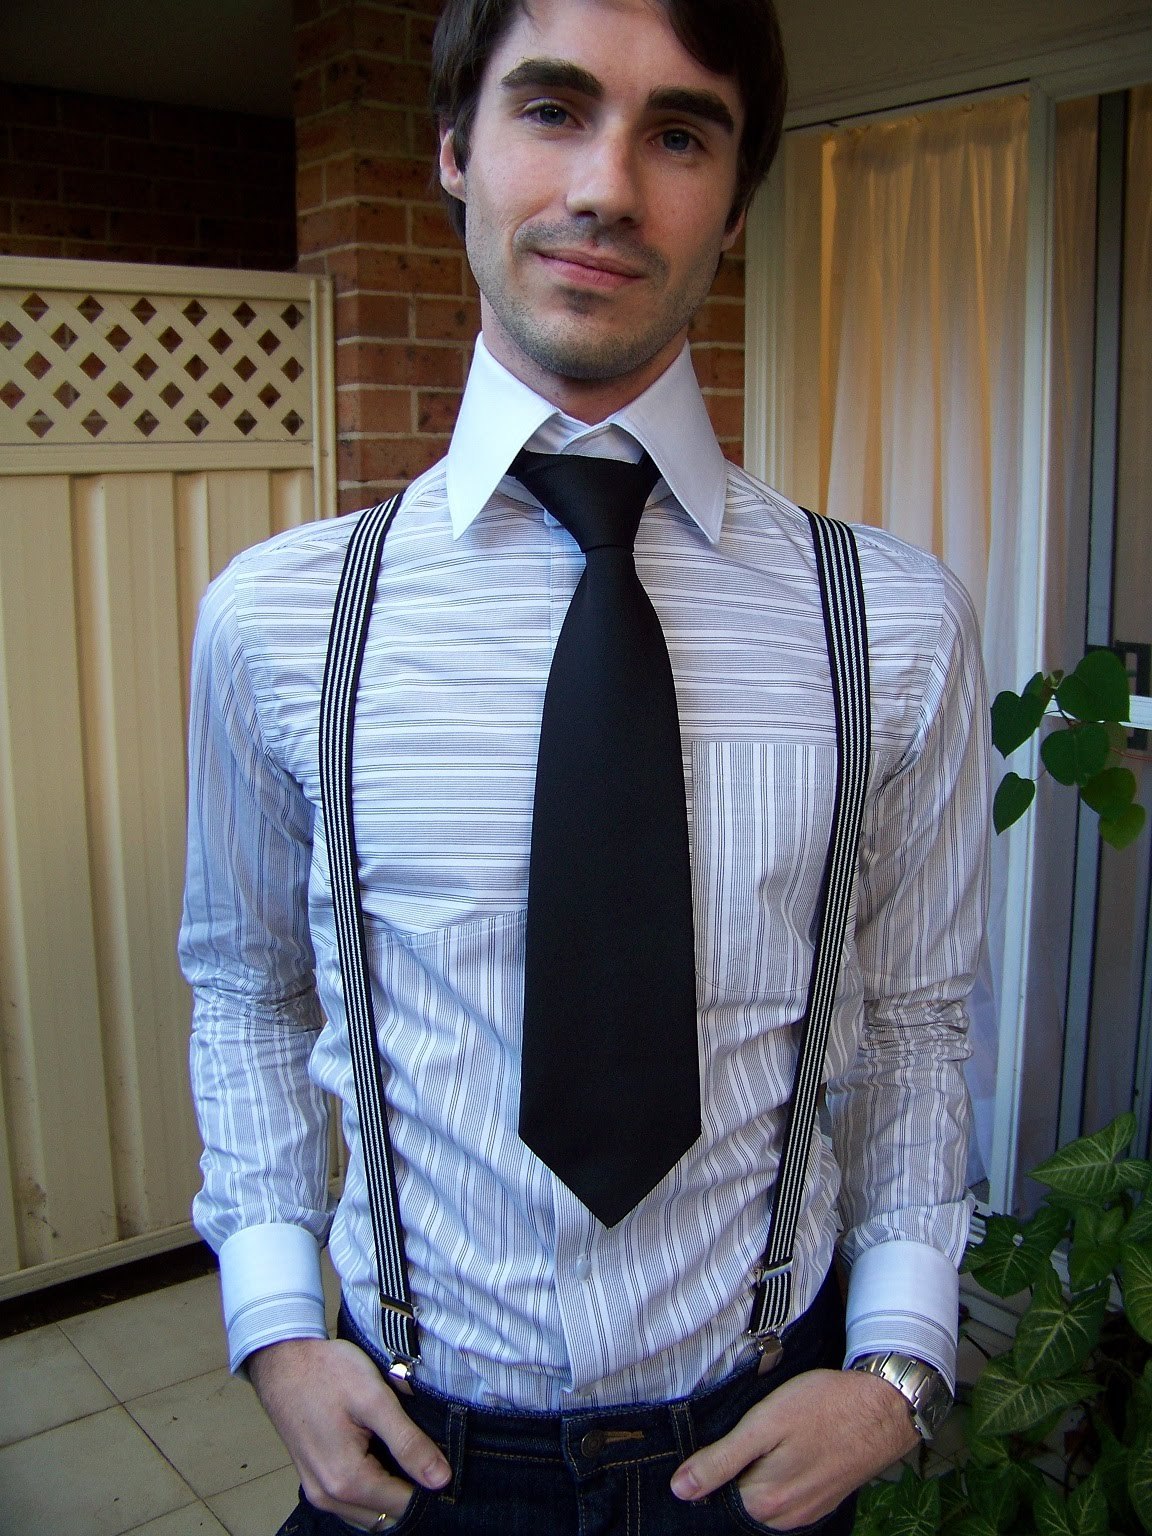 boyswearingsuspenders:

These are awesome. Do want!
[x]

When your tie is as wide as it is long, you&#8217;re doing it wrong.  Moving forward, if at anytime in the future I worry about the choices that lie ahead of me and whether or not I&#8217;ll &#8220;make it&#8221; in this world, I&#8217;ll always think back to this boner as a reminder that the vast majority of human beings on this earth are clueless troglodytes and that I&#8217;m fucking awesome.